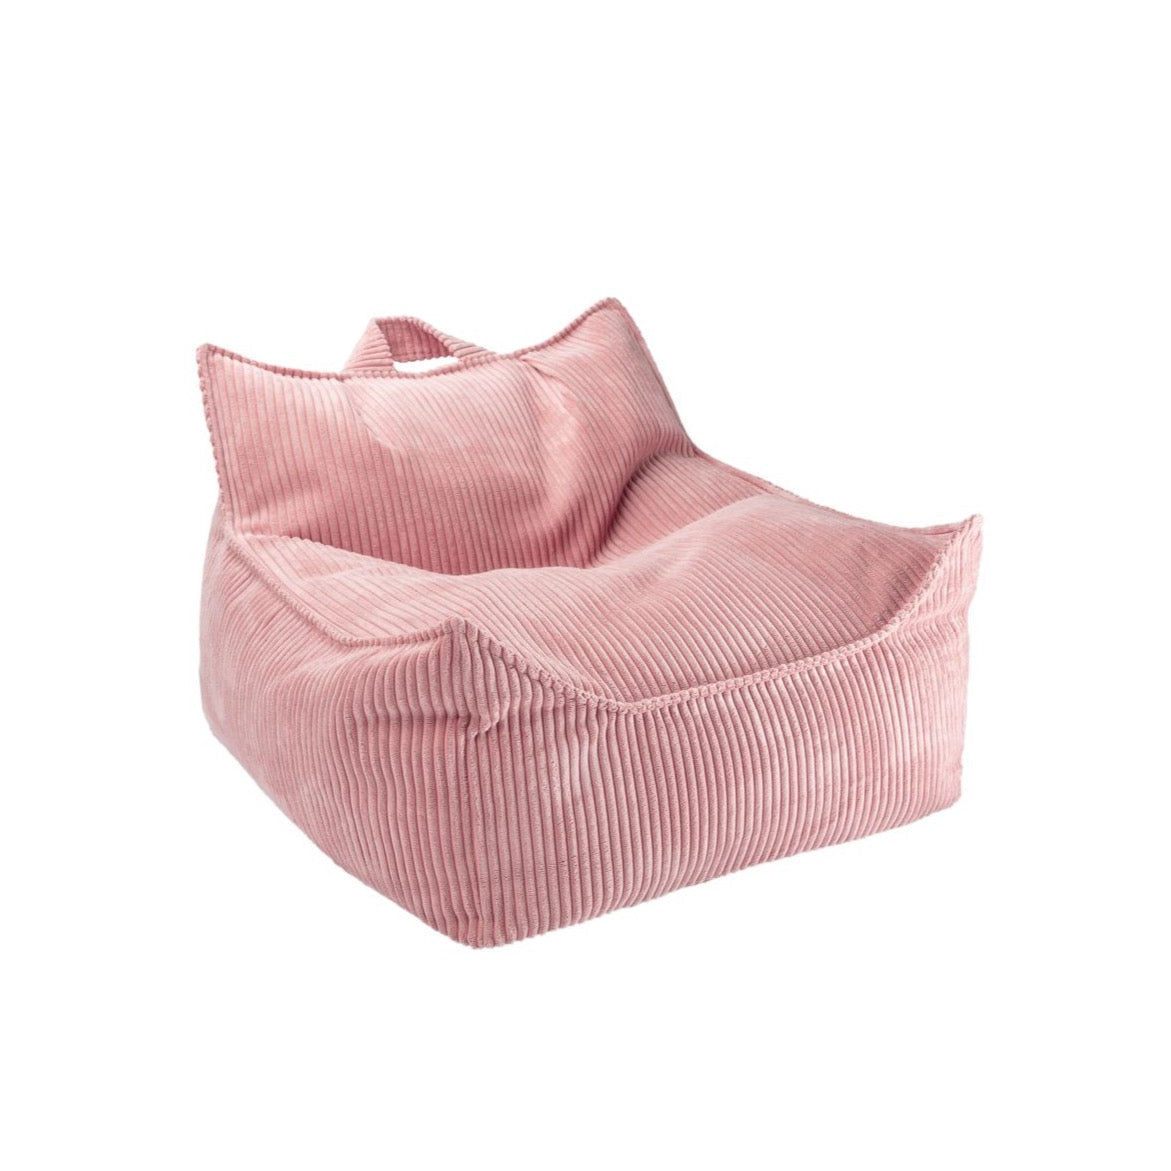 Wigiwama Pink Mousse Beanbag Chair at Rugs by Roo